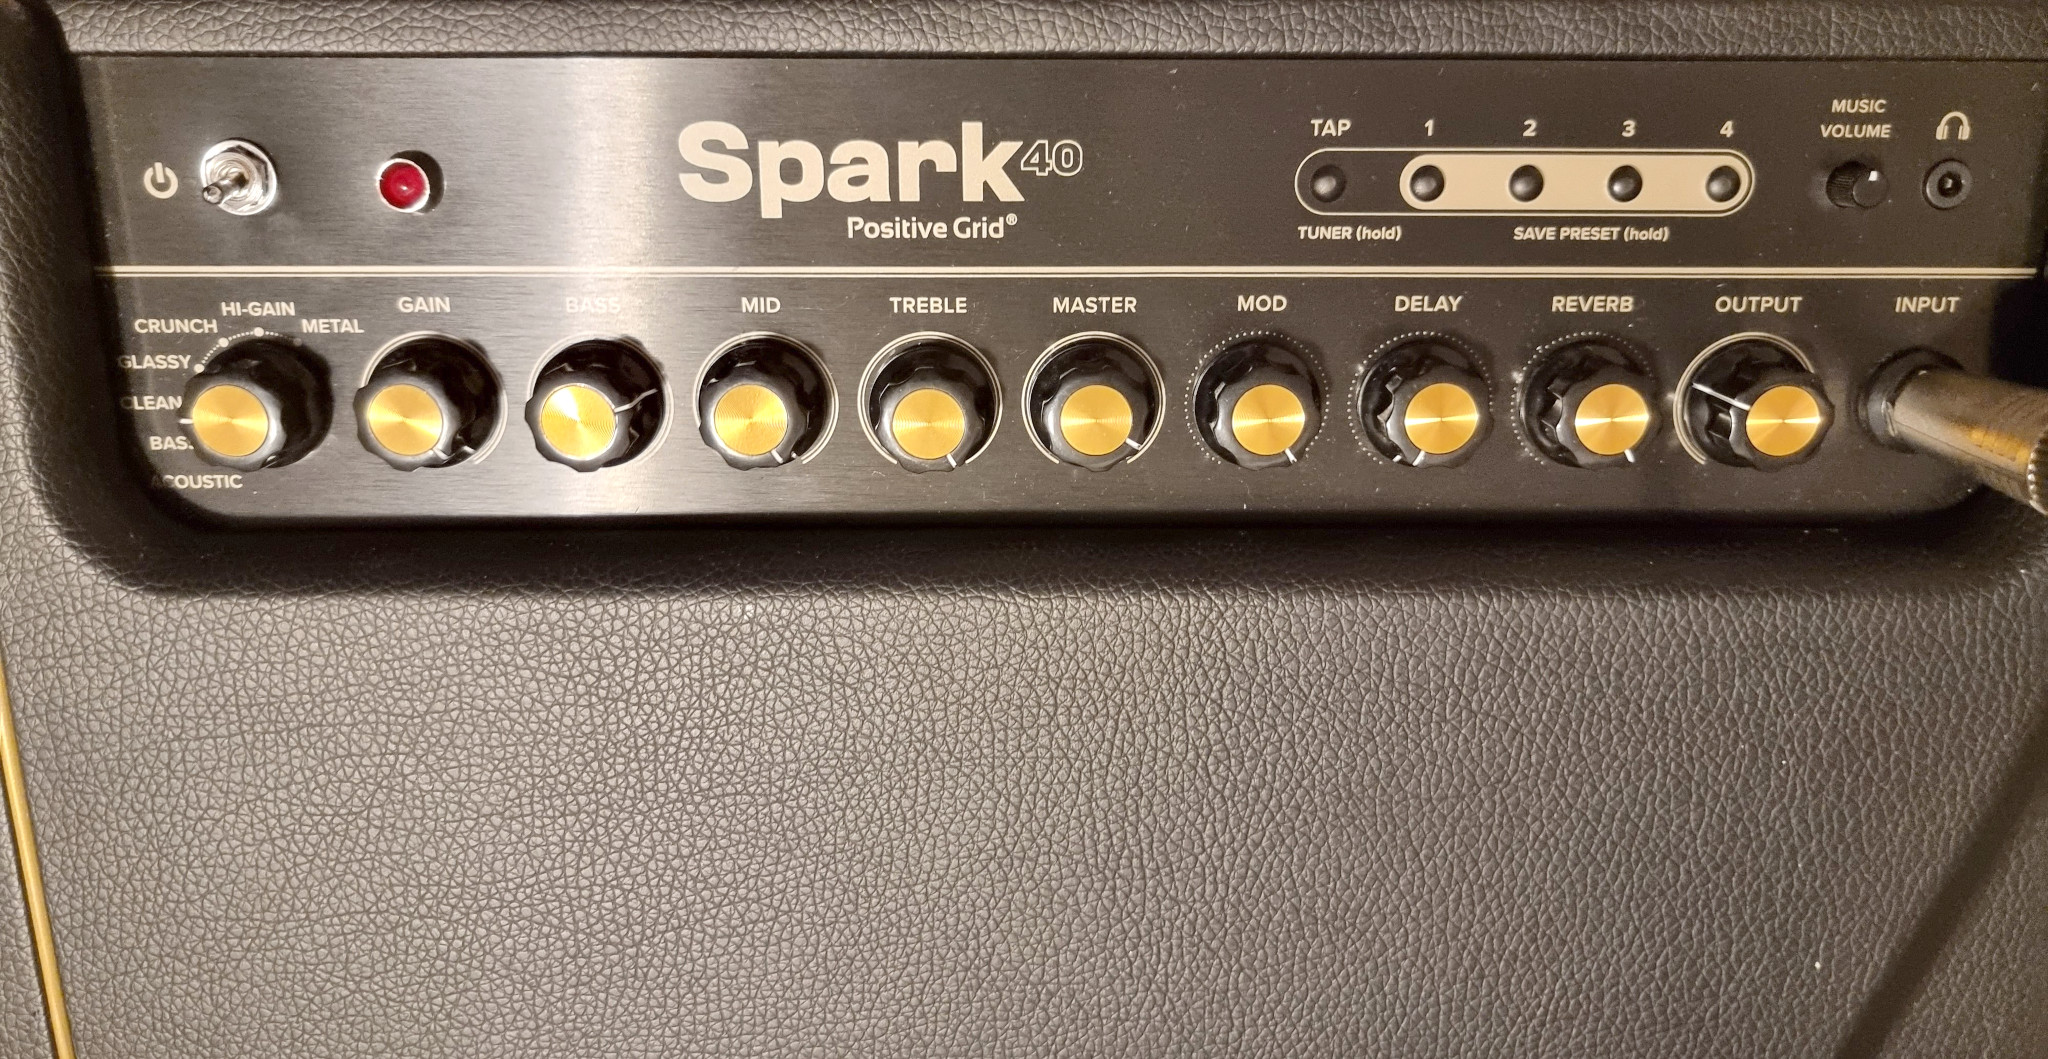 Hardware Review – the Spark 40 Amp by Positive Grid so is this a “serious” amp?  or just a “gadget”?